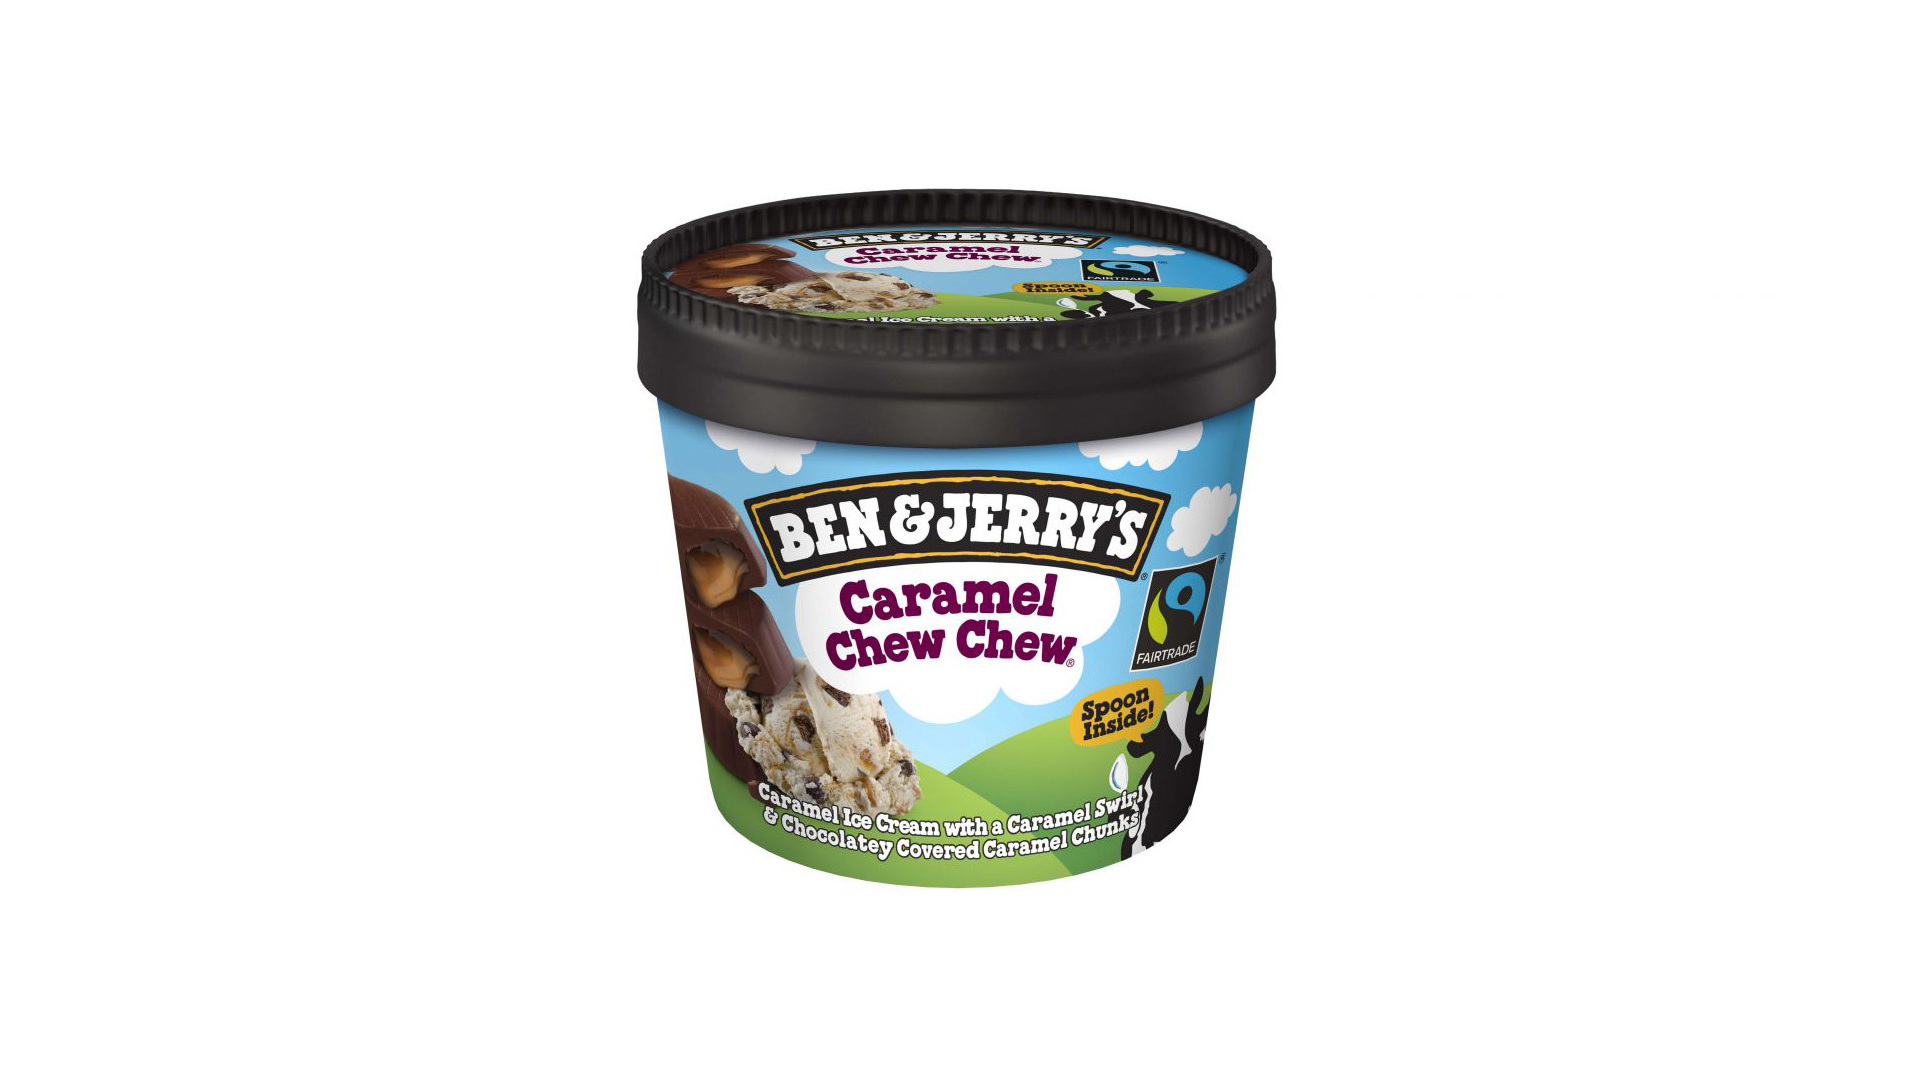 Ben & Jerry's Caramel Chew Chew 100ml - Chicken Burger Collection in Ilford IG1